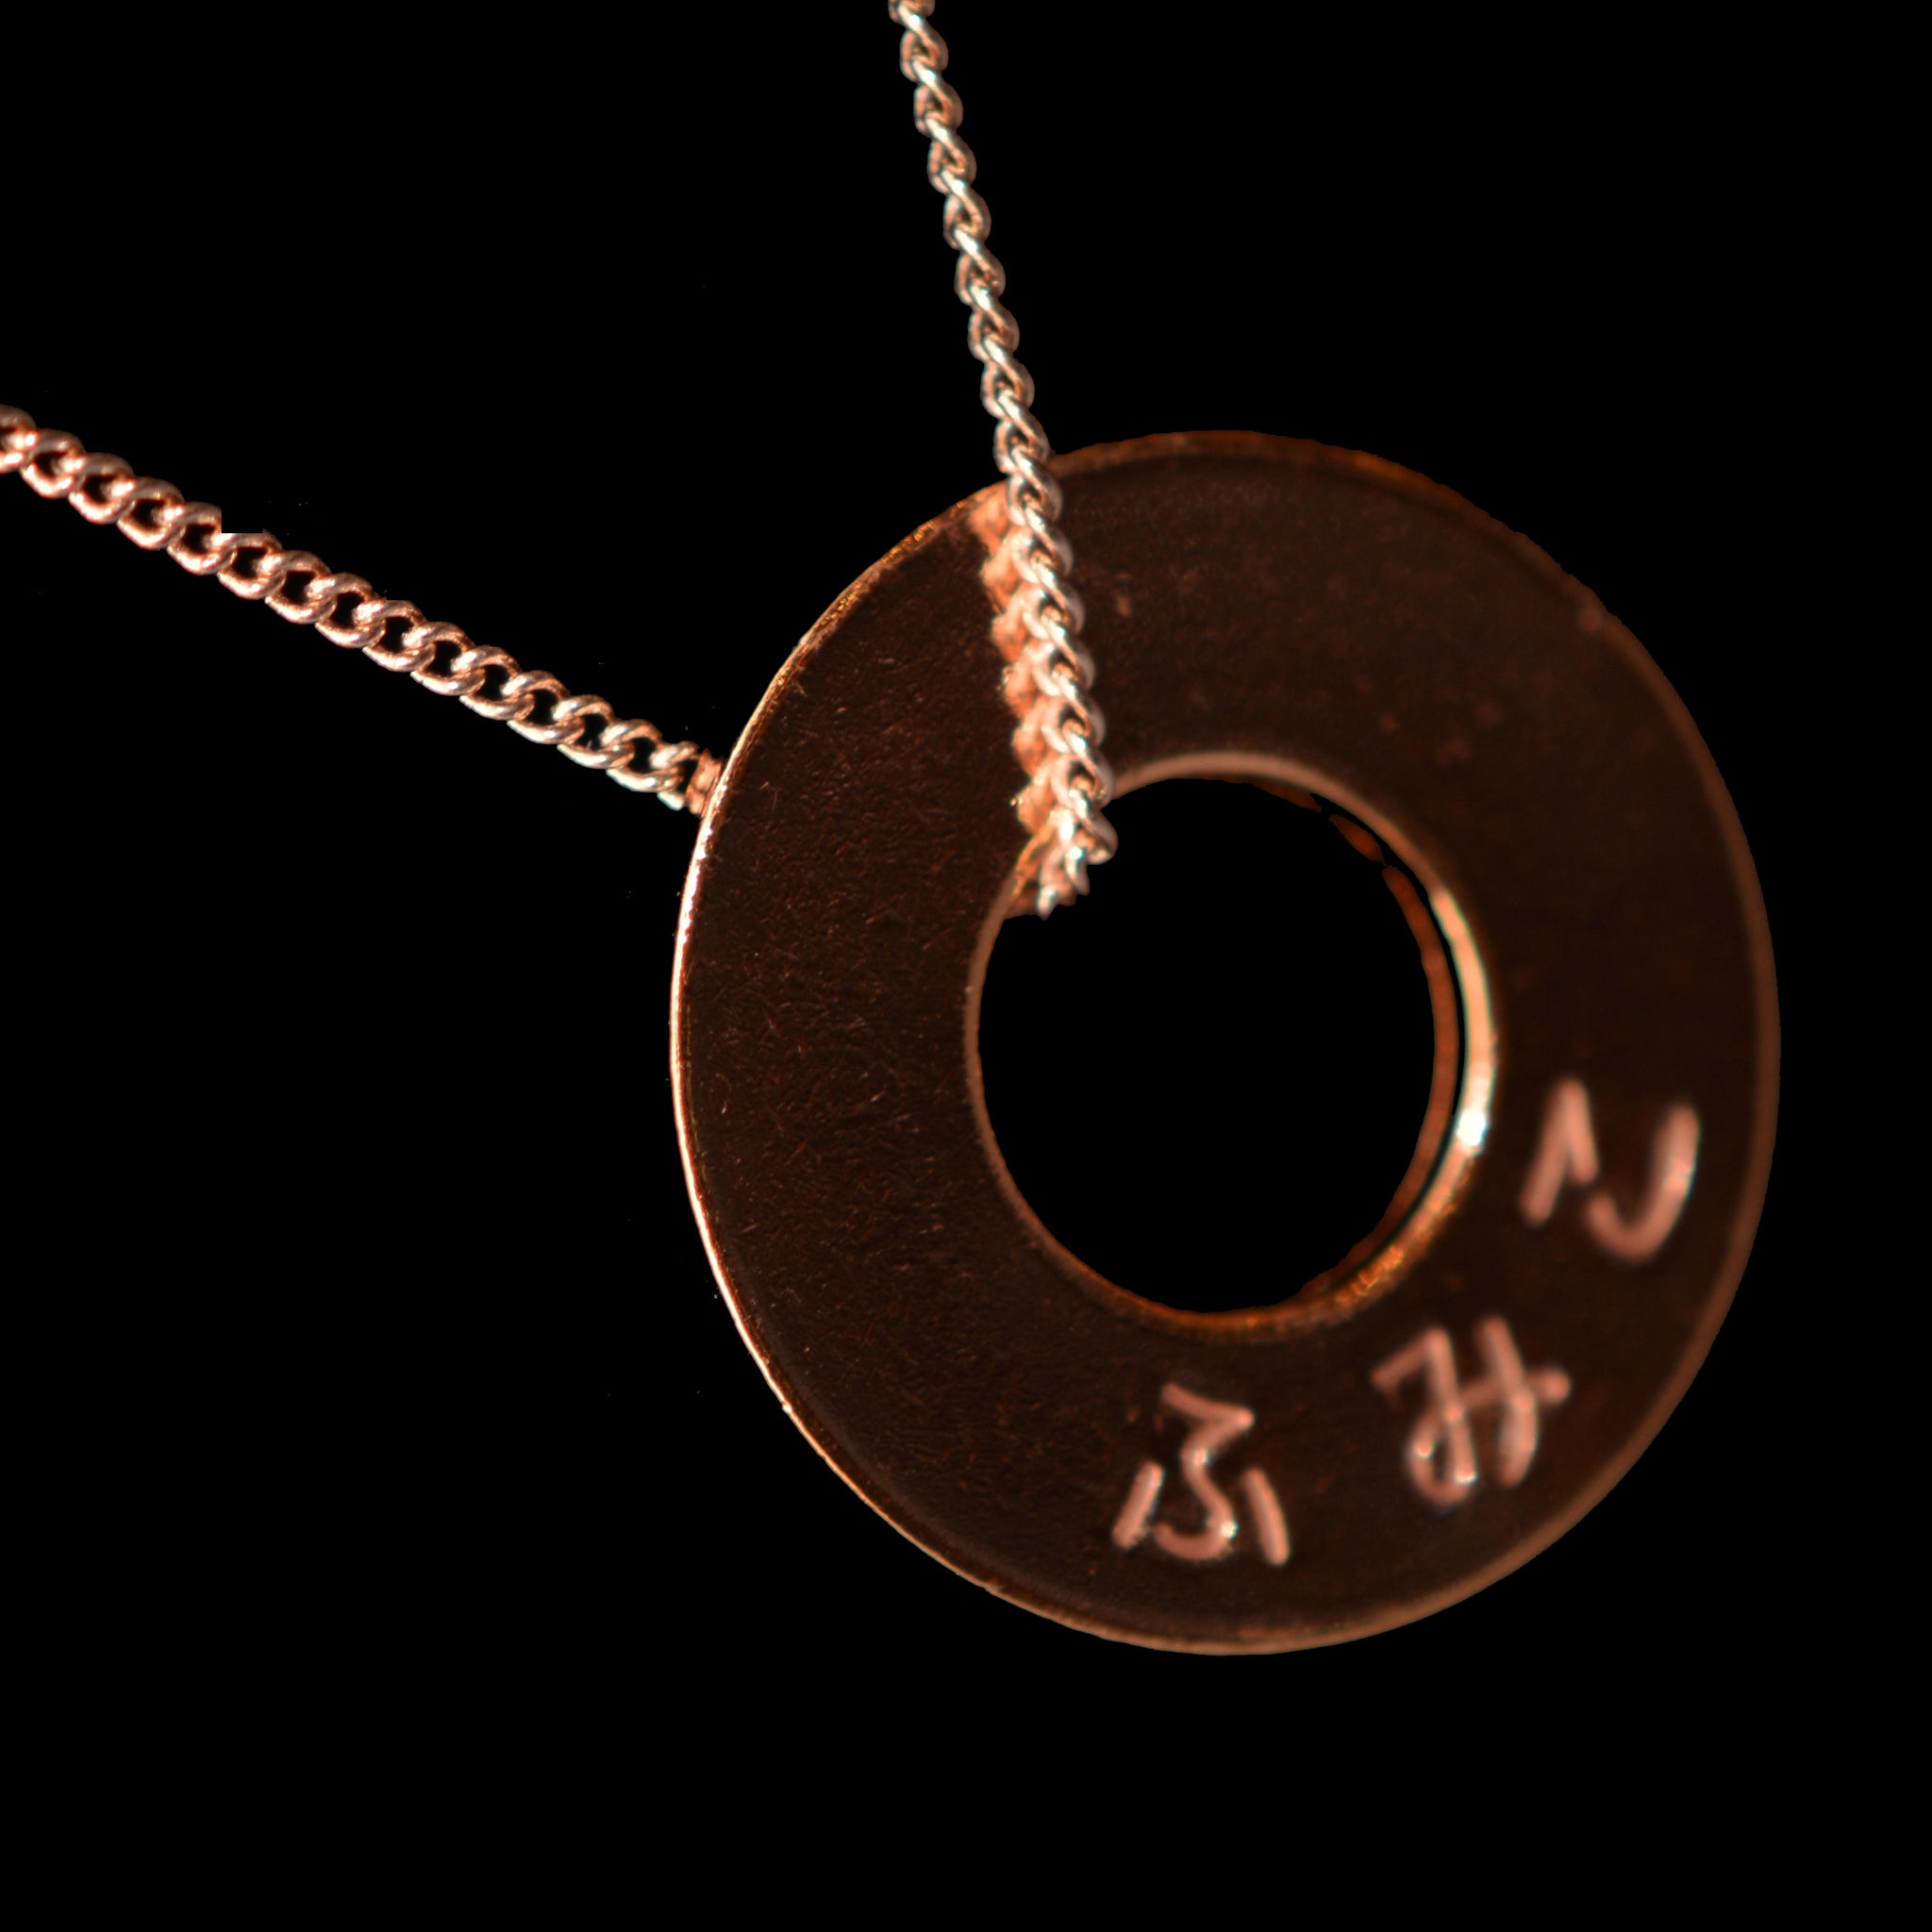 Personalized hand-stamped necklace - in English or Japanese (hiragana)